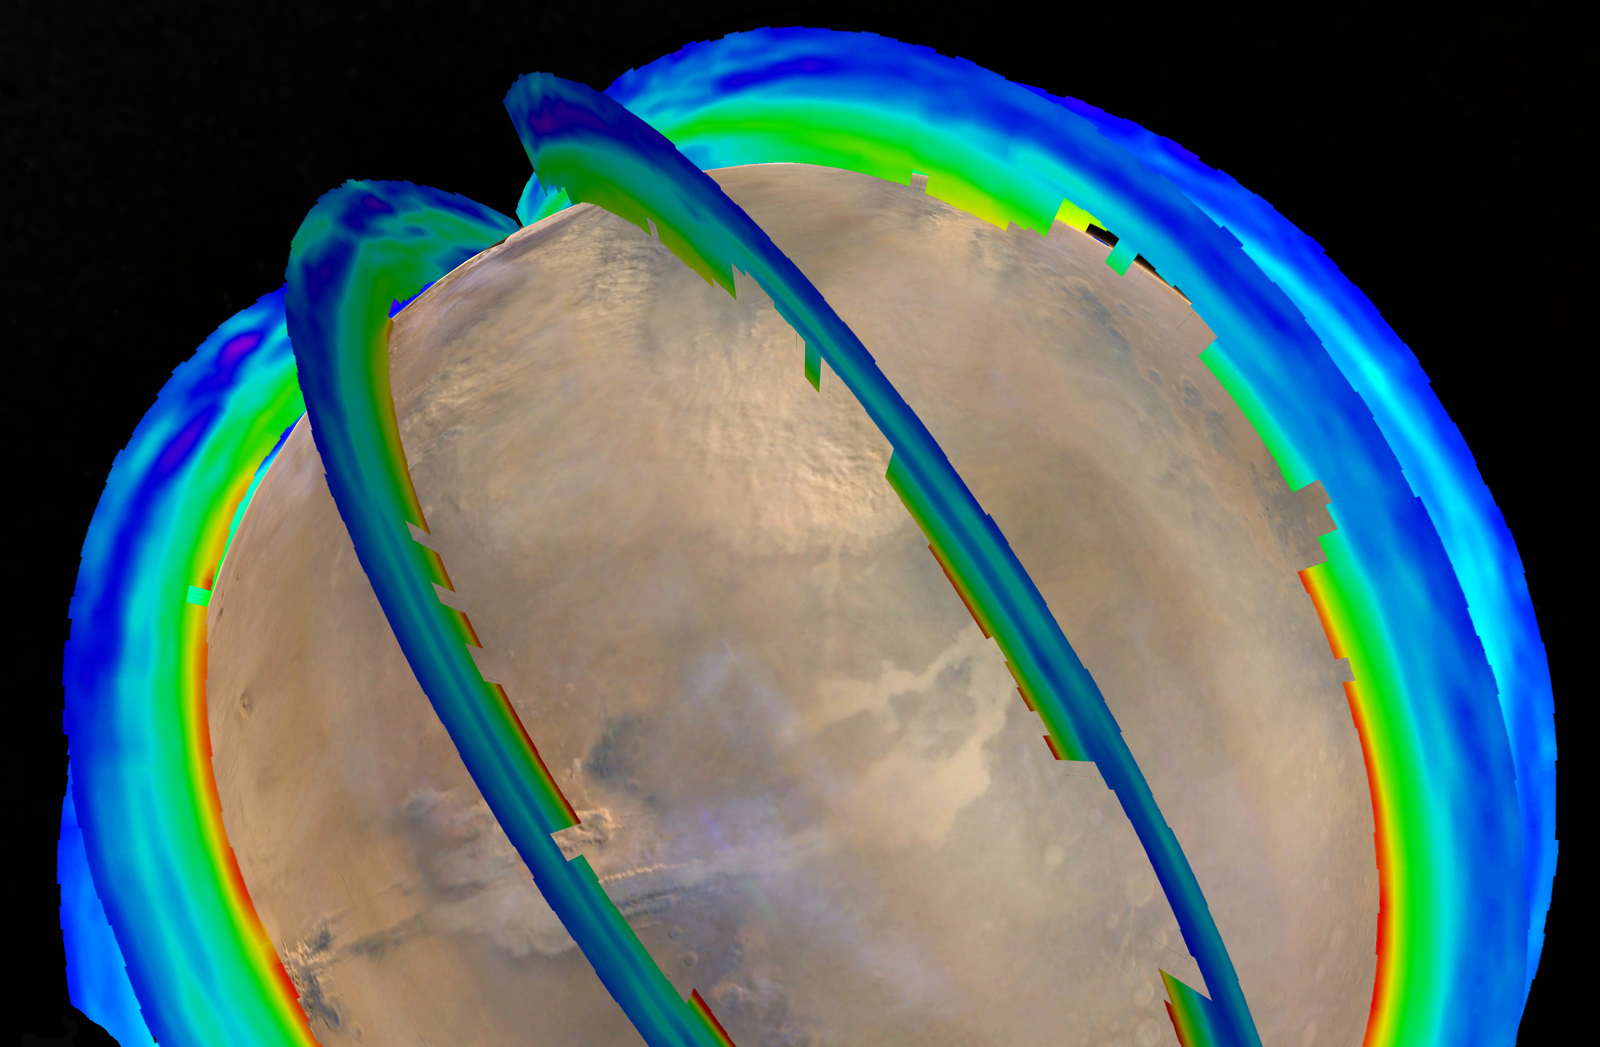 This graphic presents Martian atmospheric temperature data as curtains over an image of Mars taken during a regional dust storm. The temperature profiles extend from the surface to about 50 miles up. Temperatures are color coded, from minus 243 degrees Fahrenheit (purple) to minus 9 F (red).